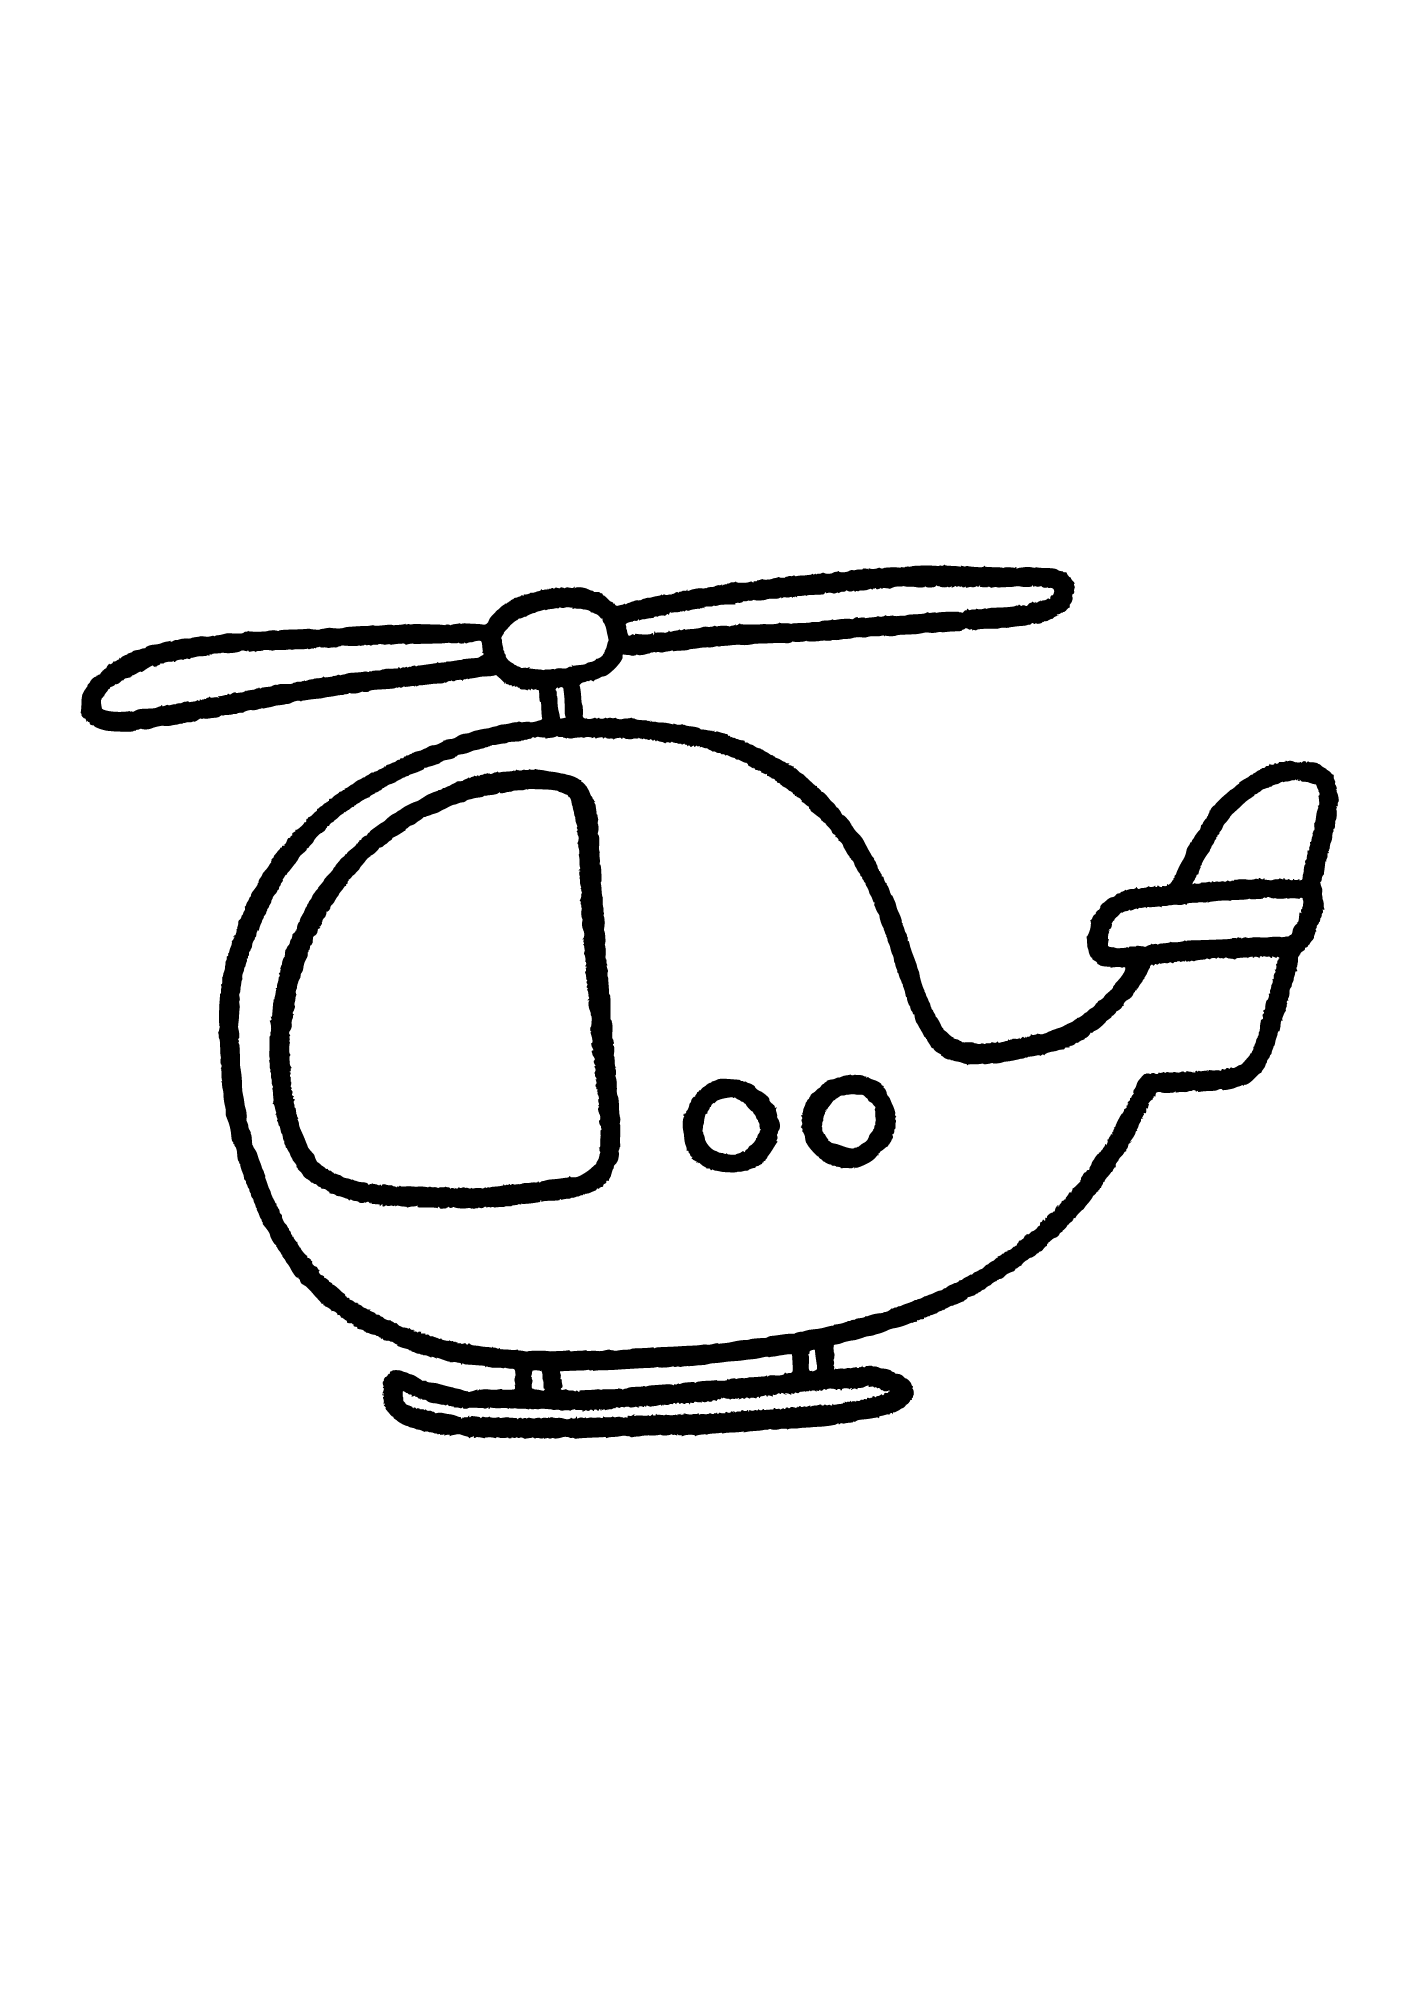 Helicopter Outline Coloring Pages